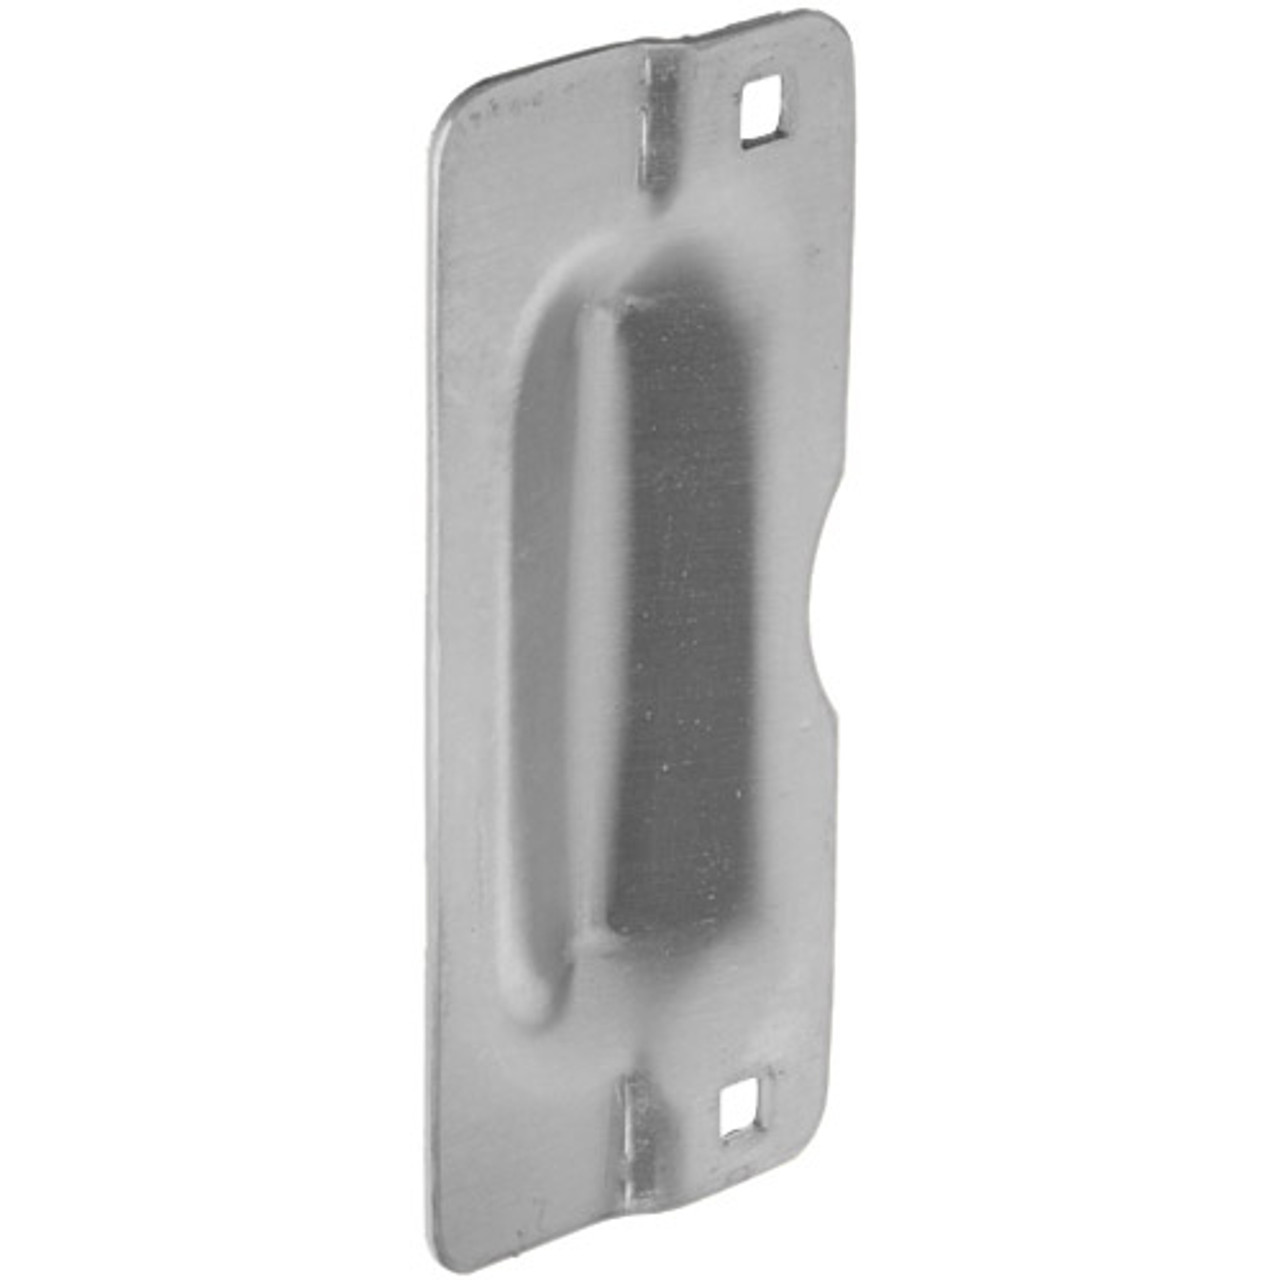 LP-207-SL Don Jo Latch Protector in Silver Coated Finish